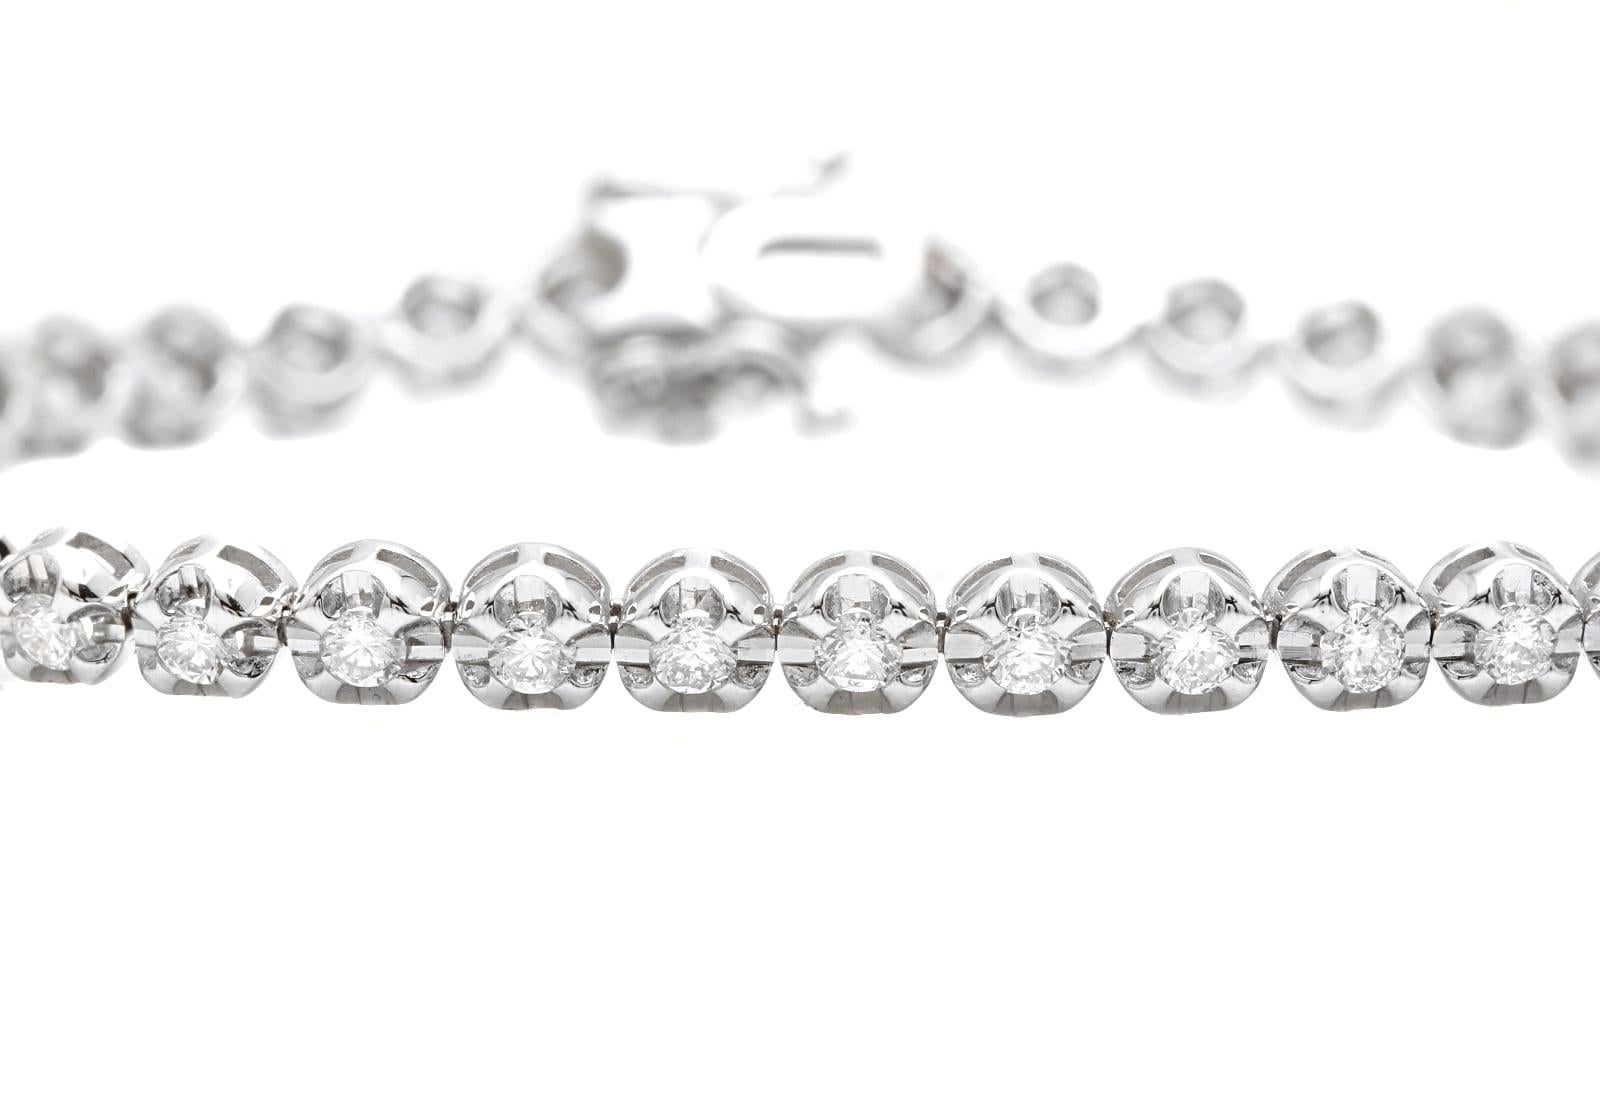 1.70 Carats Stunning Natural Diamond 14K Solid White Gold Bracelet 

Suggested Replacement Value: Approx. $5,500.00

STAMPED: 14K

Total Natural Round Diamonds Weight: Approx. 1.80 Carats (color G-H / Clarity SI1-SI2)

Bangle Wrist Size is:  7